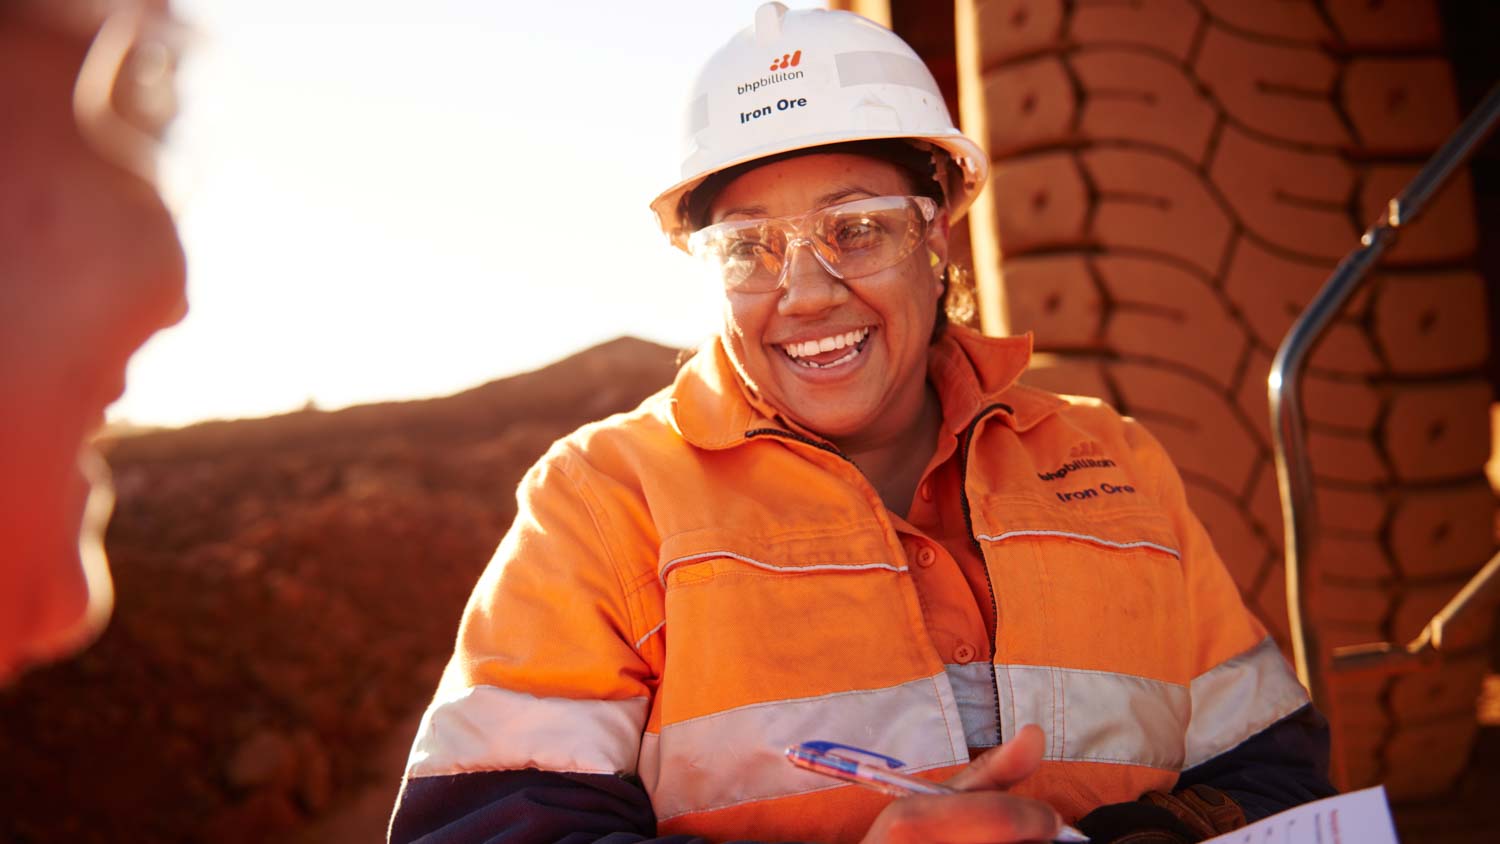 Miner General Services Indigenous Mining Operations Australia